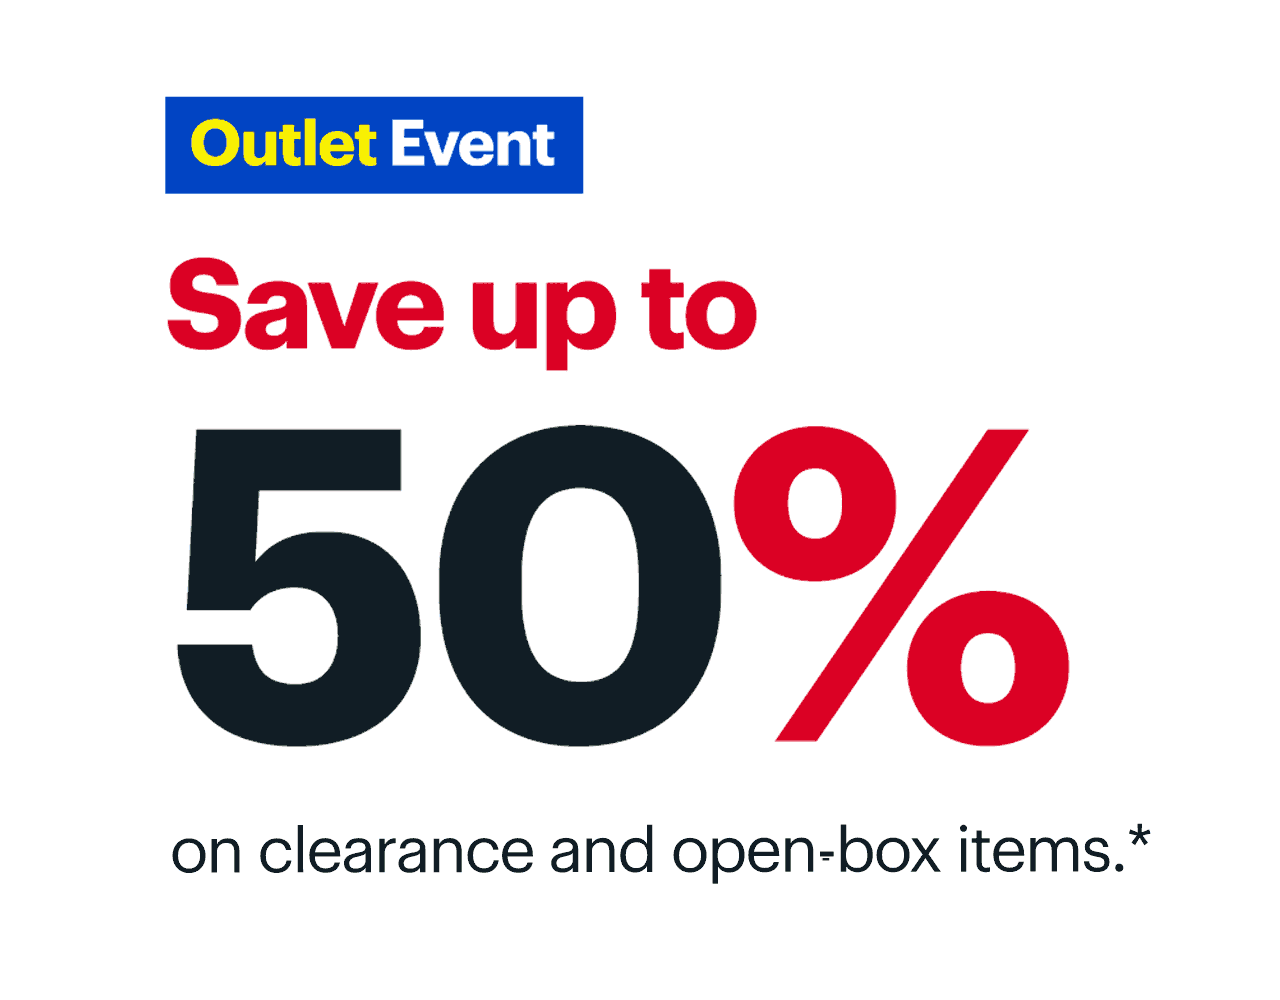 Outlet Event. Save up to 50% on clearance and open-box items. Reference disclaimer. Outlet Event. Saveupto 90% on clearance and open-box items.* 